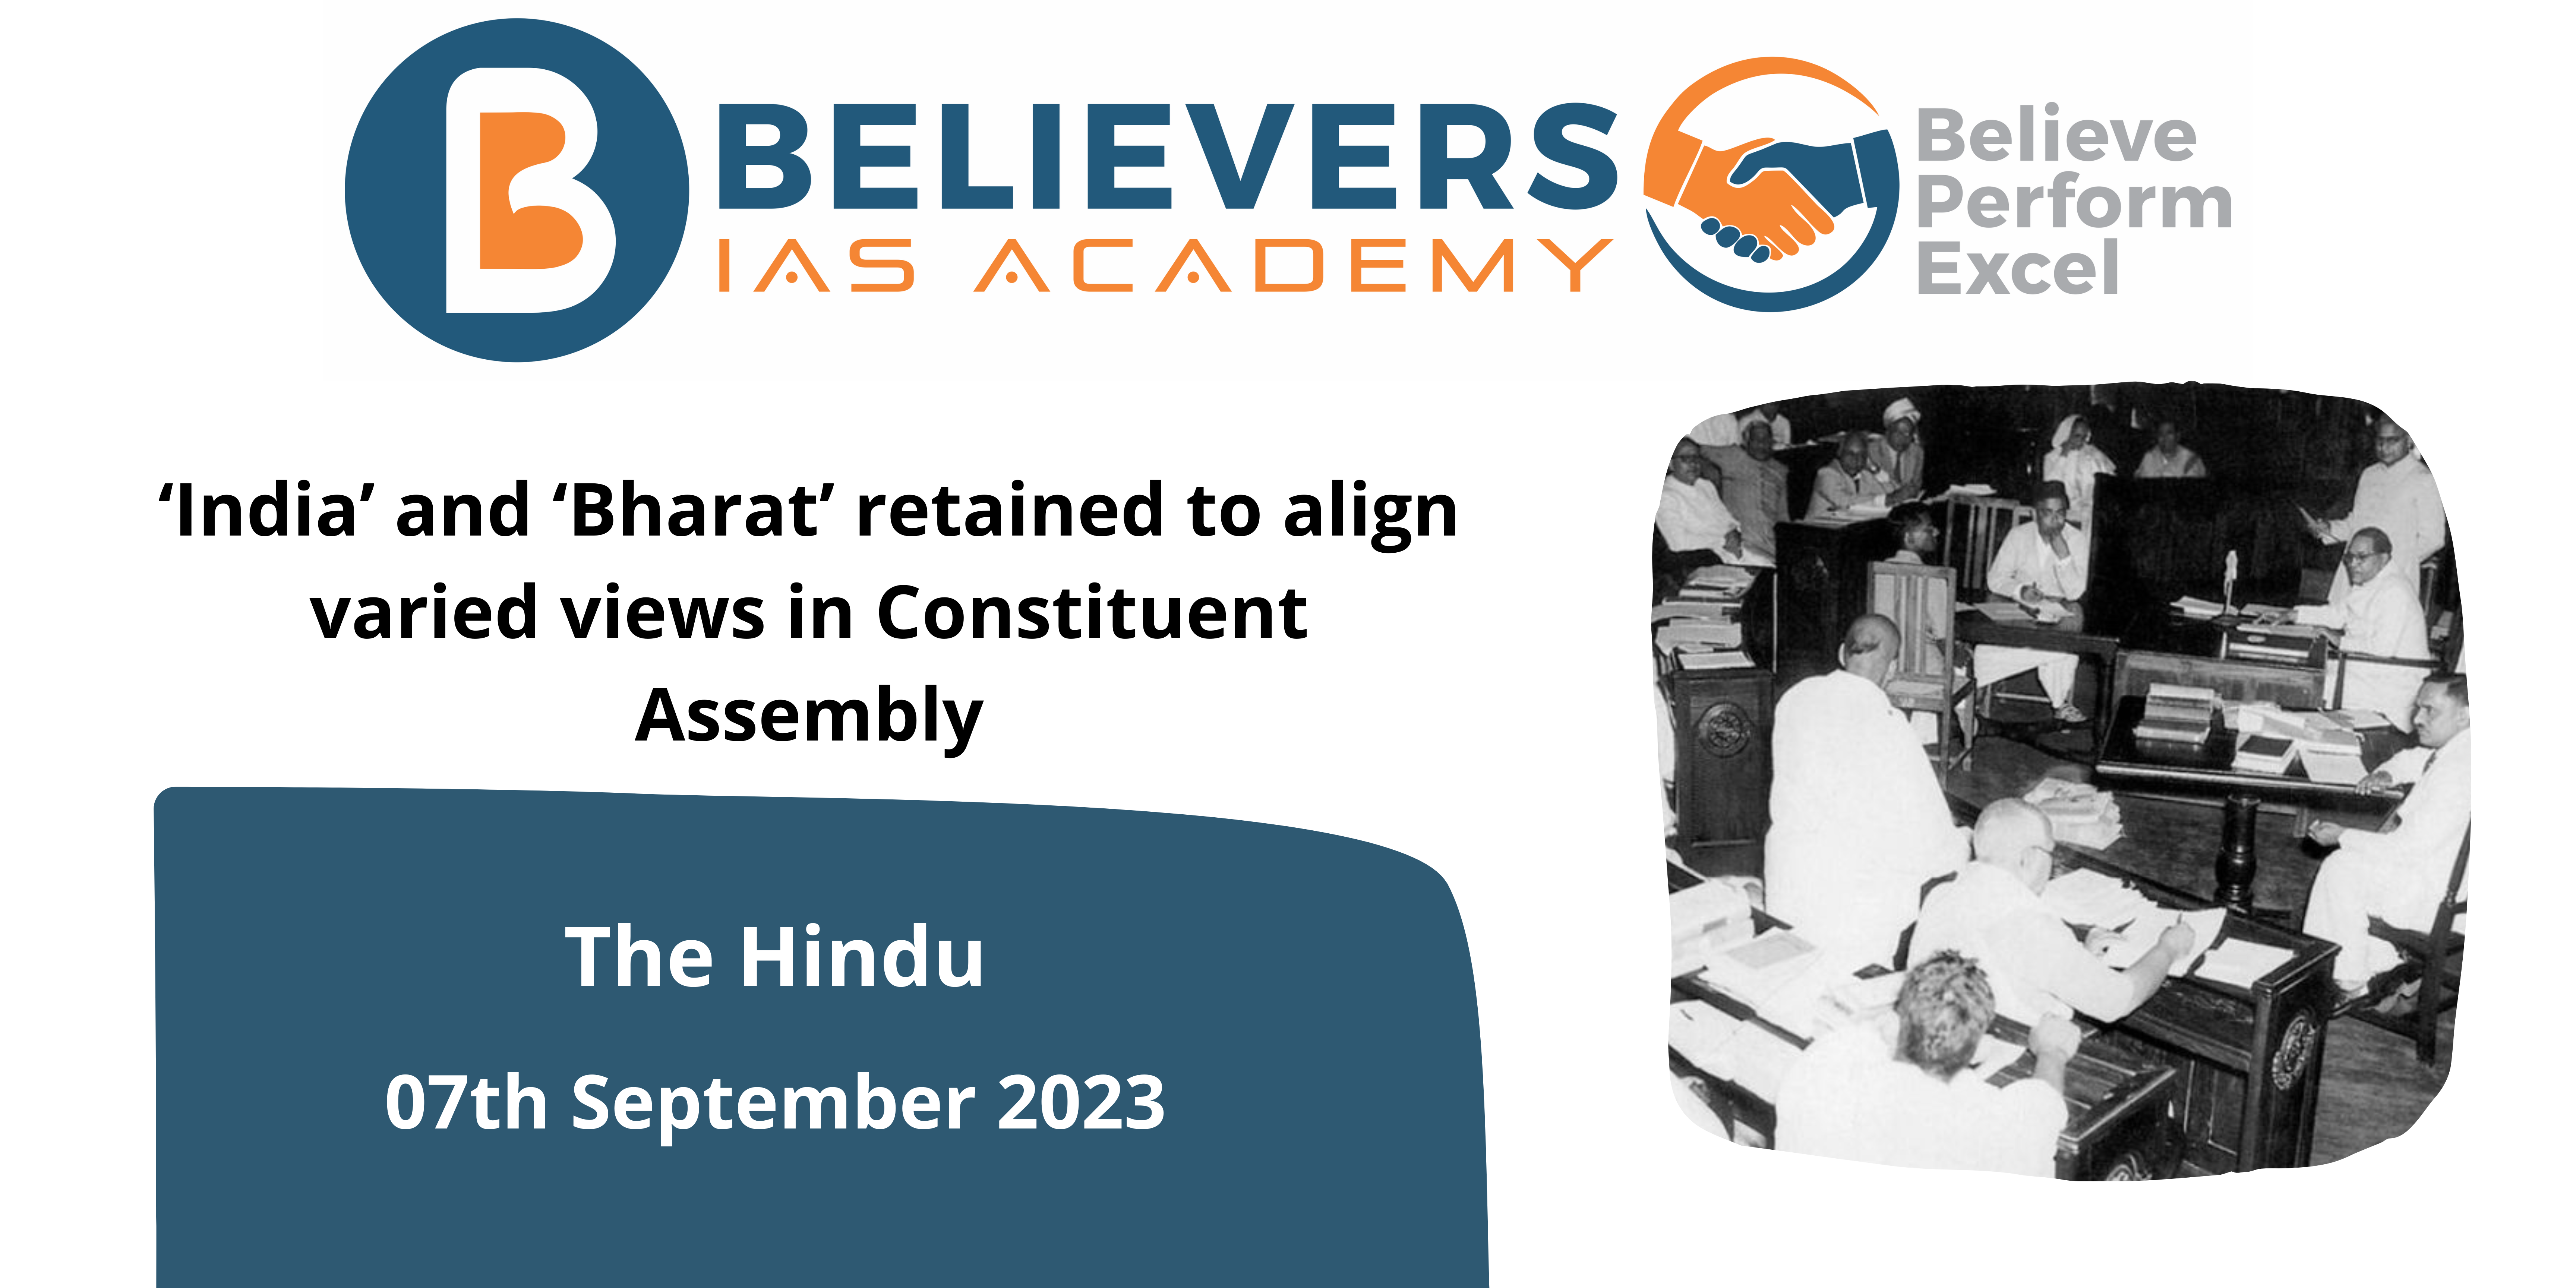 India’ and ‘Bharat’ retained to align varied views in Constituent Assembly